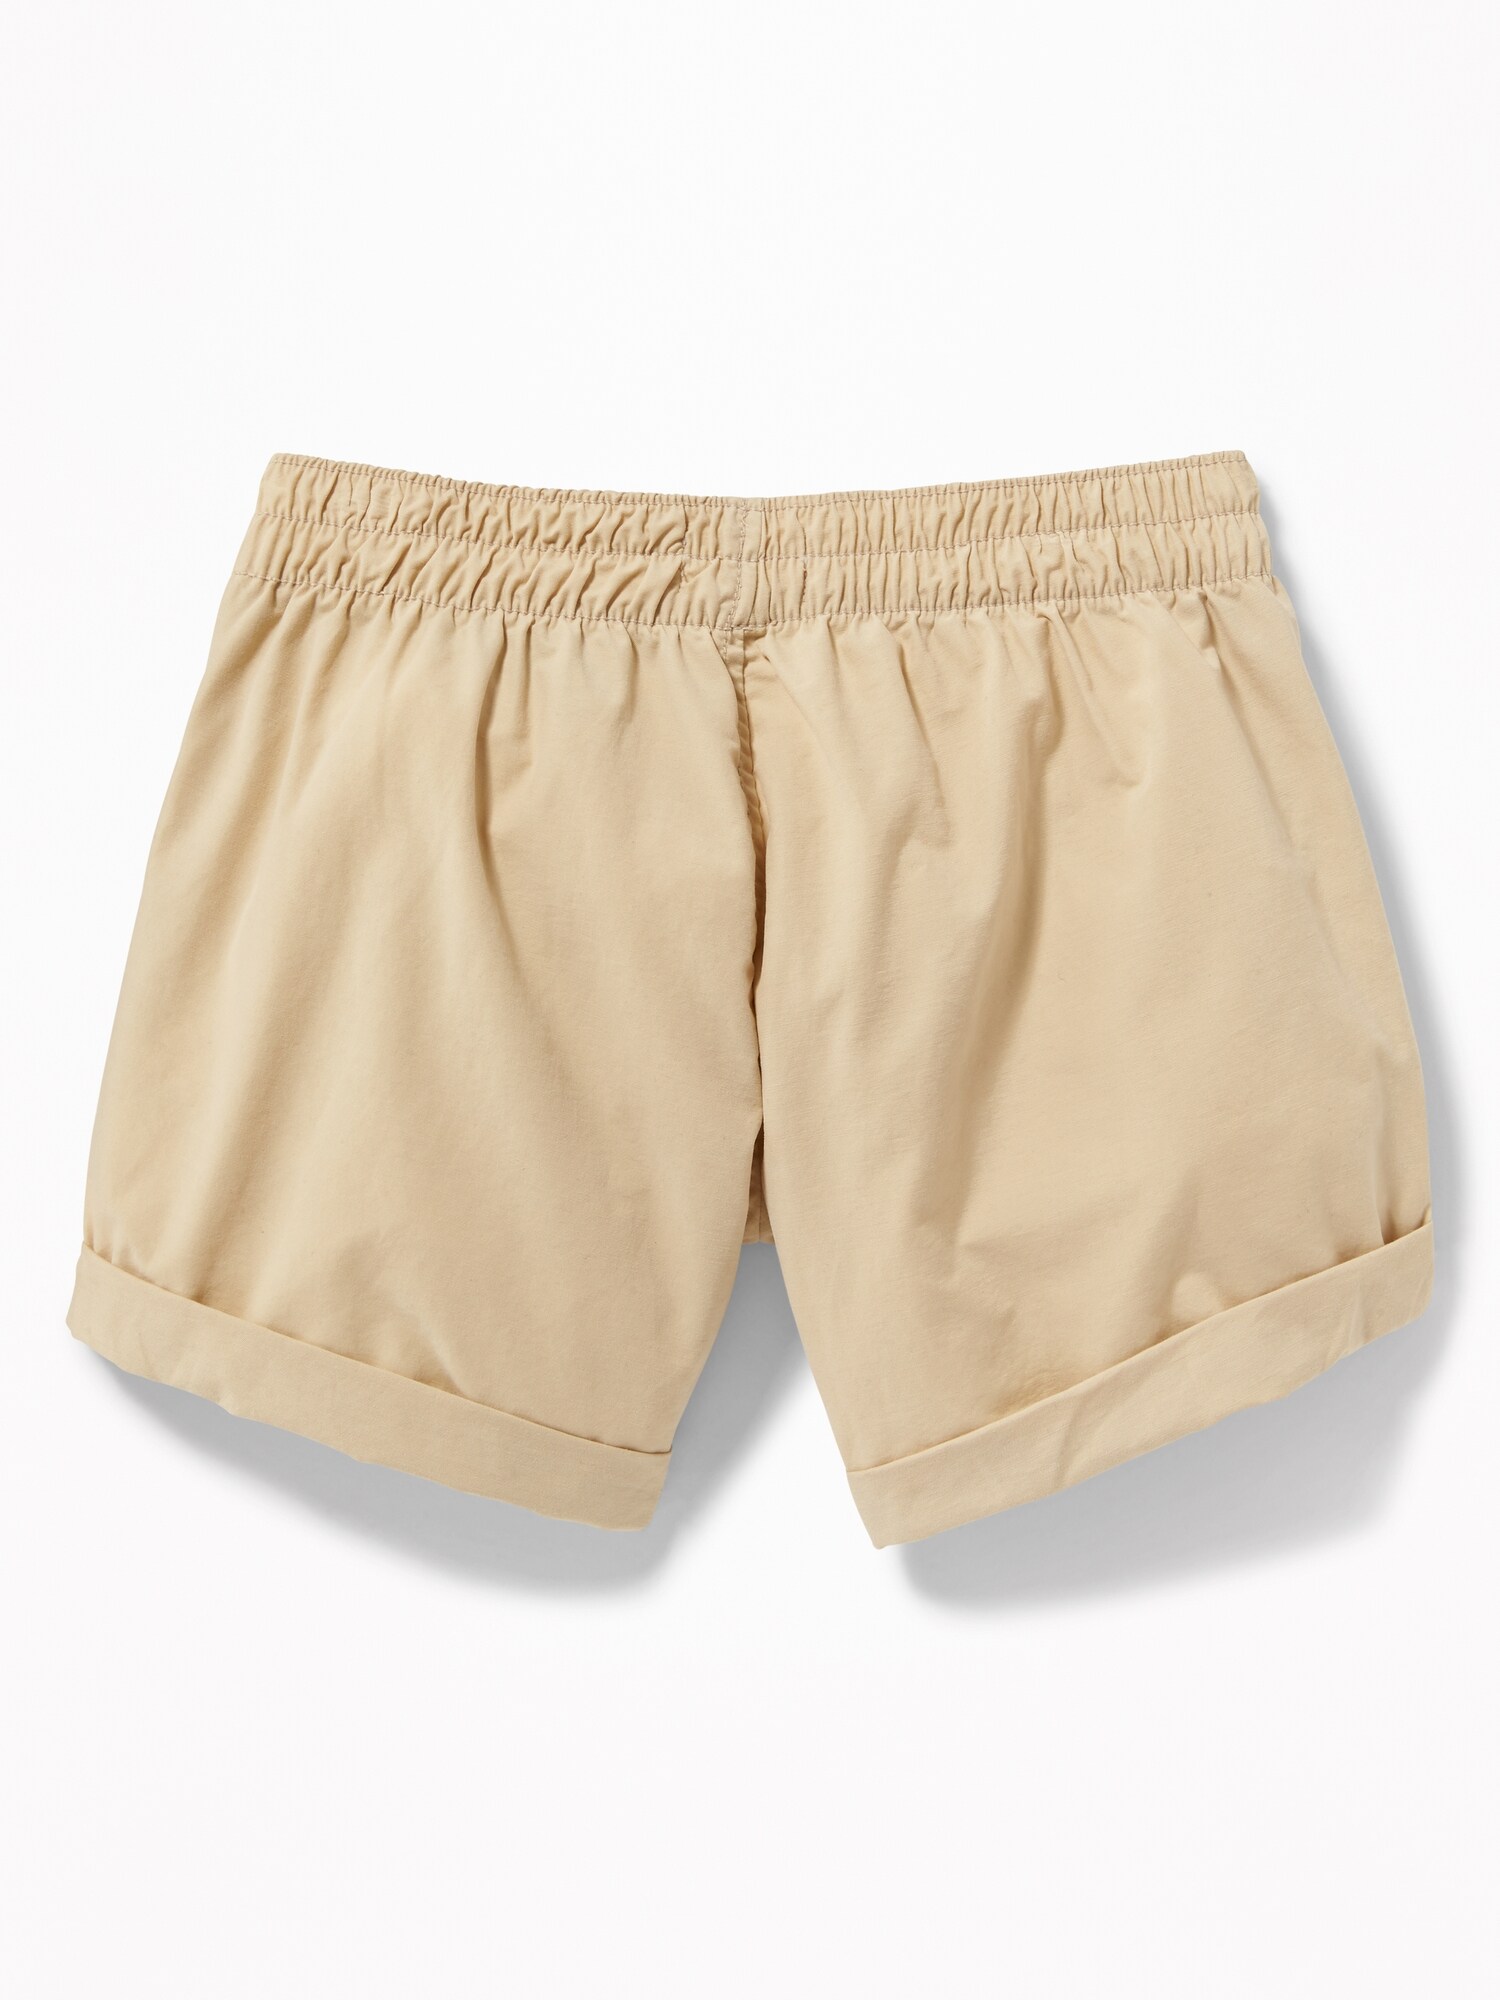 Cuffed Pull-On Poplin Shorts For Girls | Old Navy